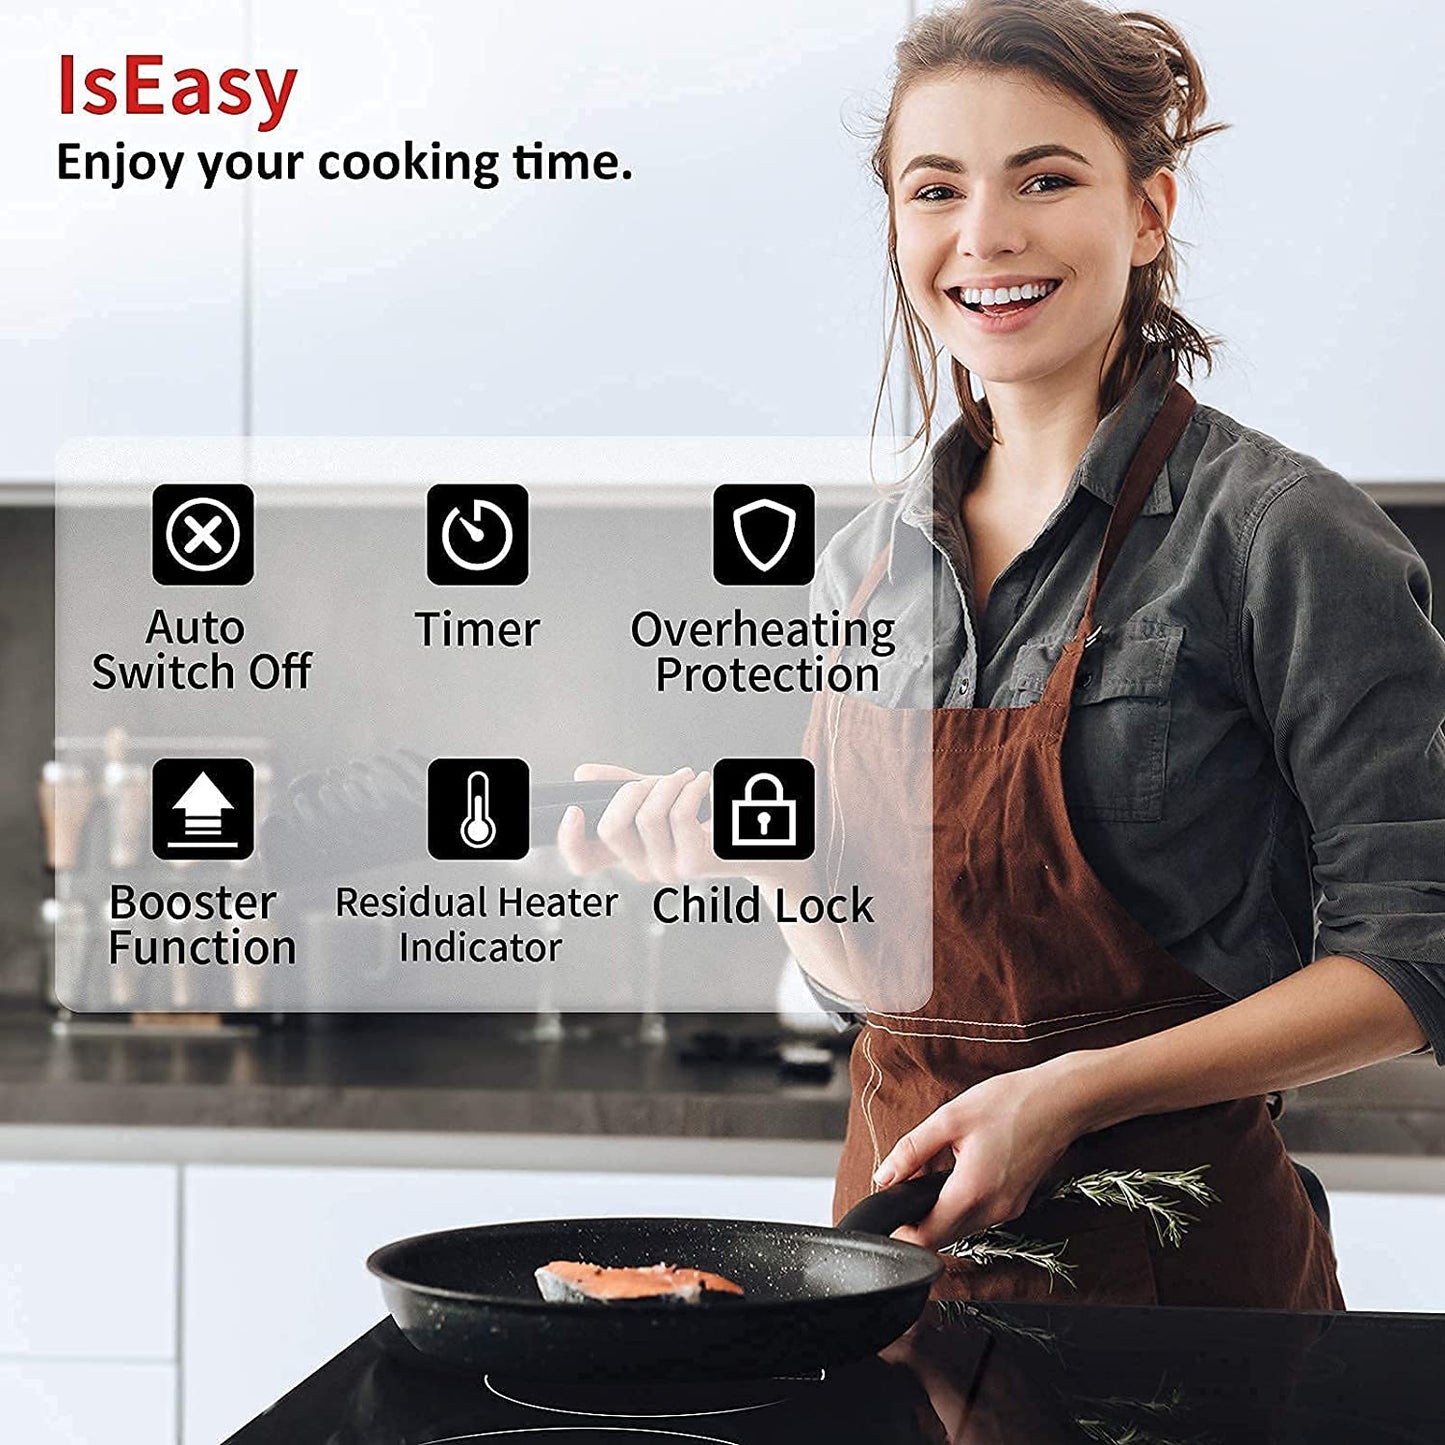 12 Inch Induction Cooktop, IsEasy electric cooktop 2 Burners, 3400W, Built-in Induction Hob Stove Smoothtop Cooker, Timer, Touch Control, 9 Heating Levels, Booster Function, Glass Black Surface, 220V